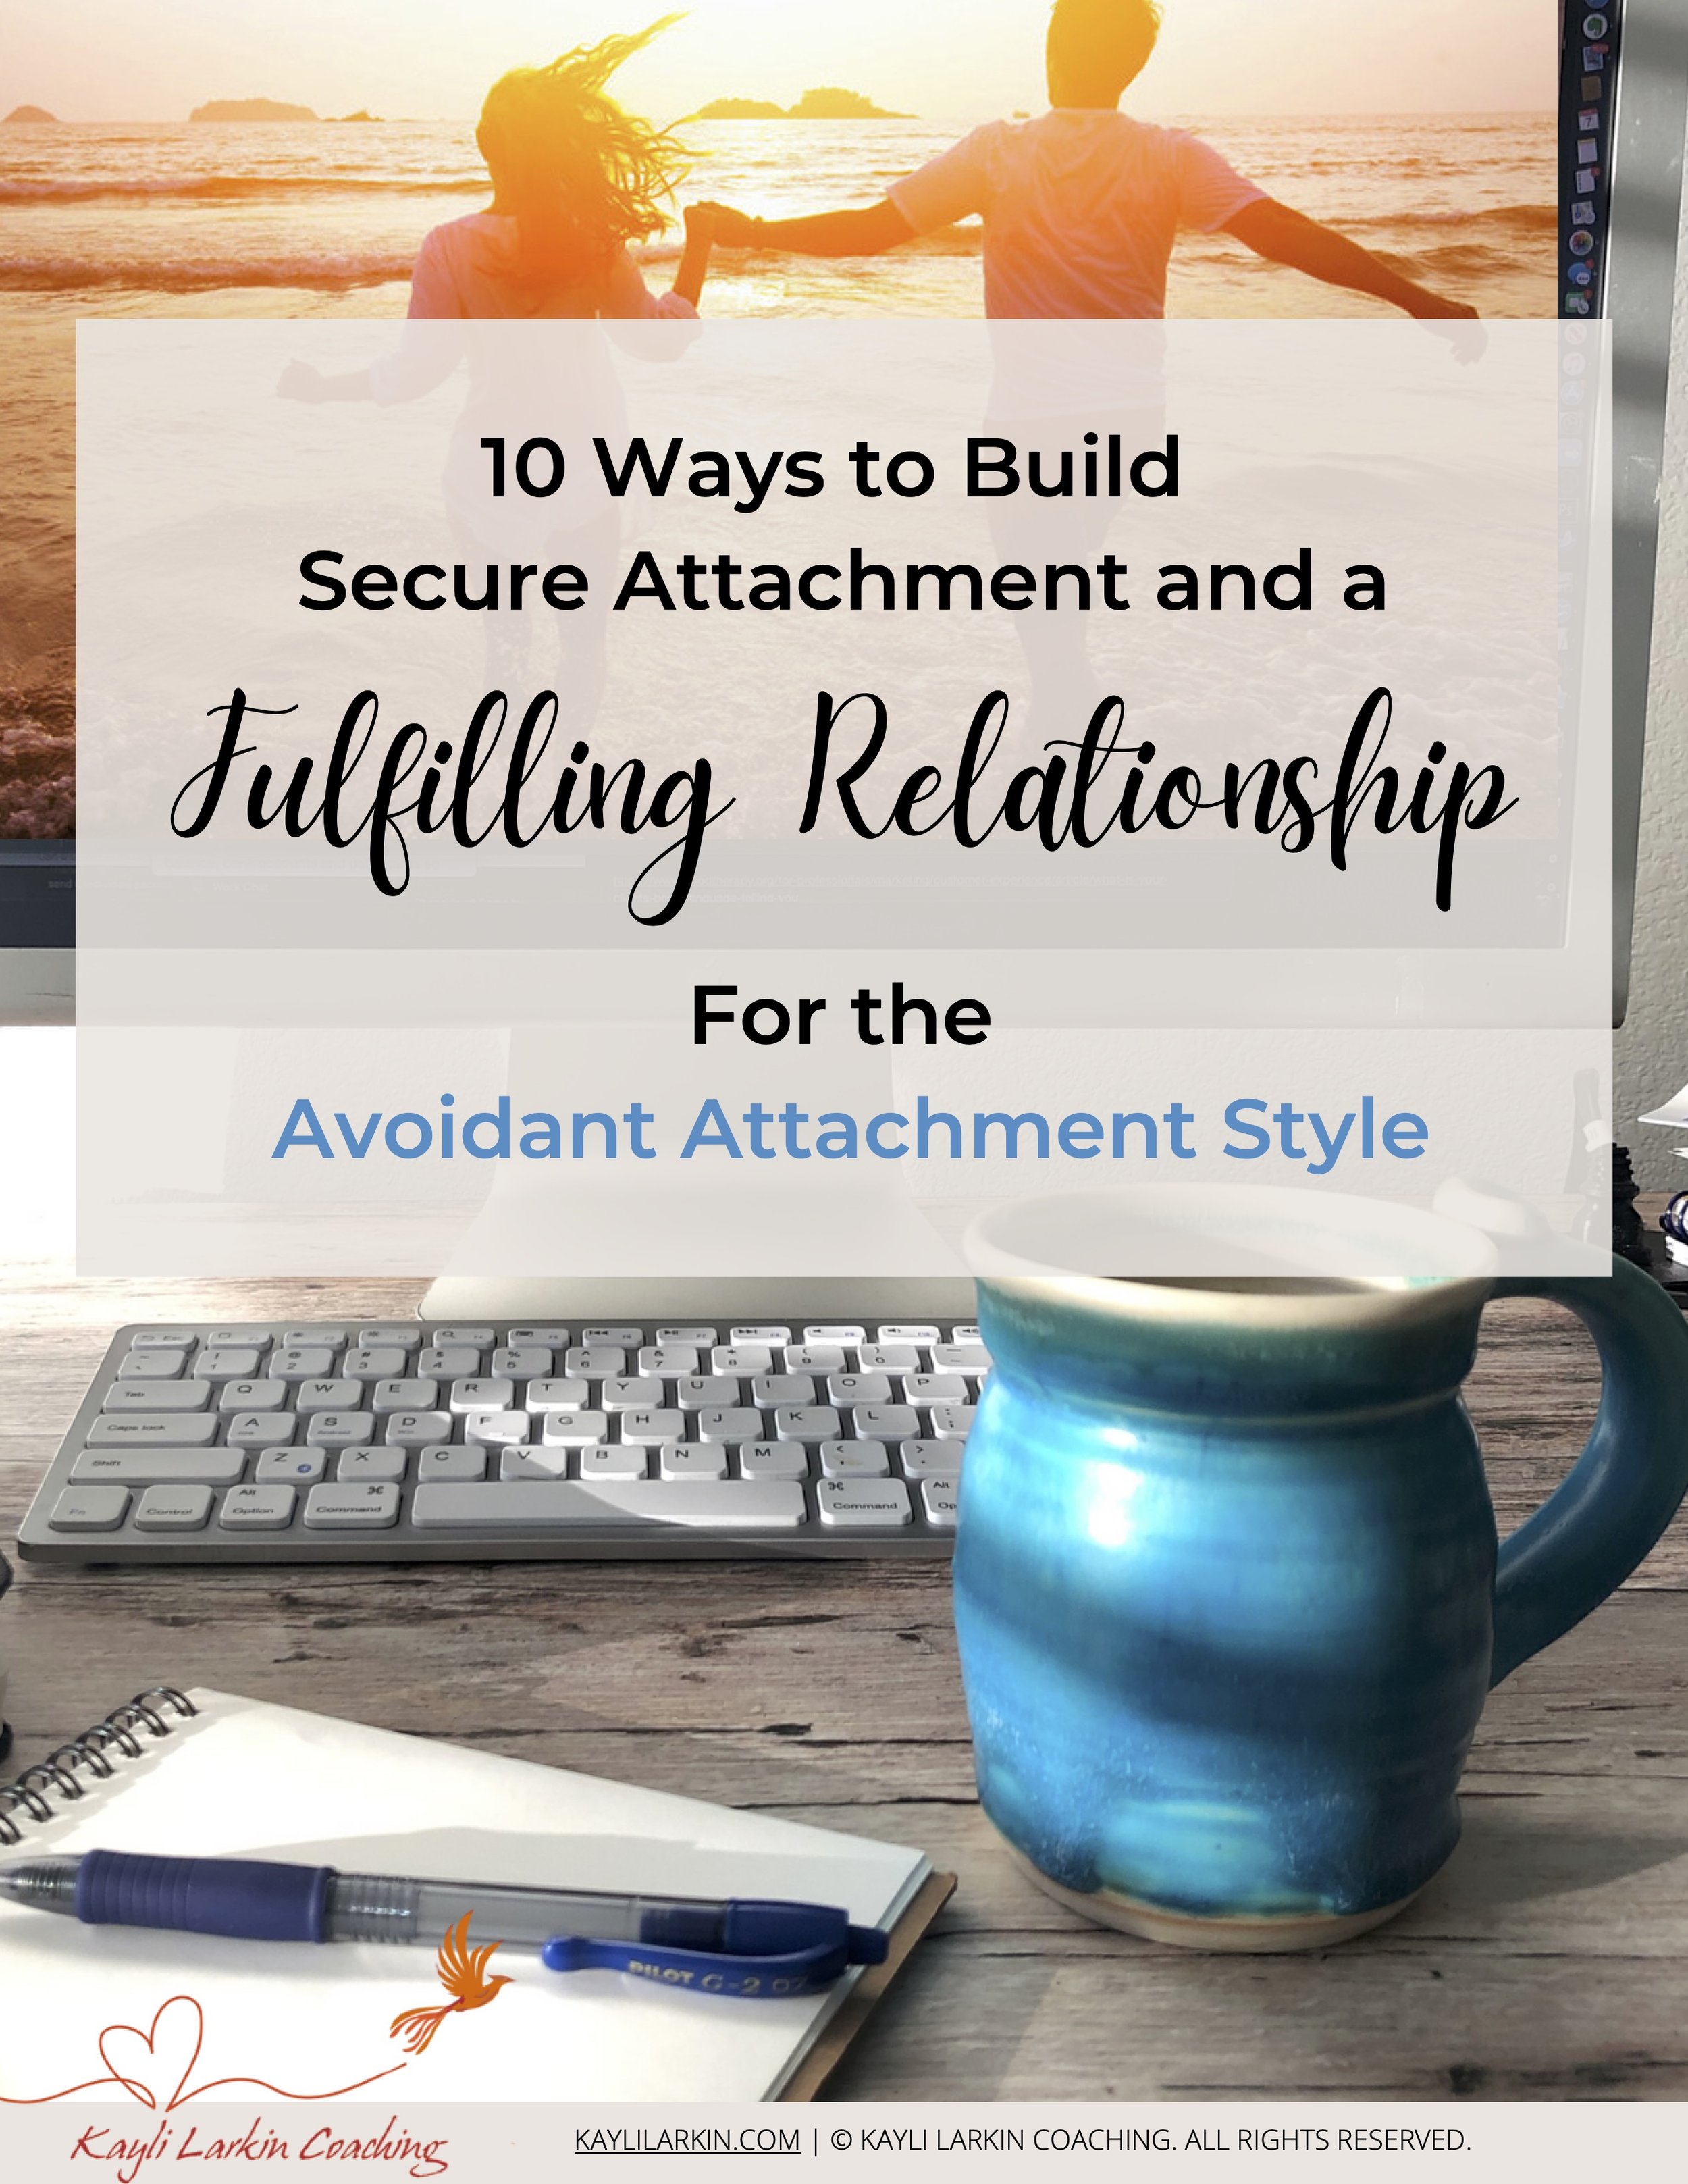 10 Steps To Secure Attachment - Avoidant Style.jpg